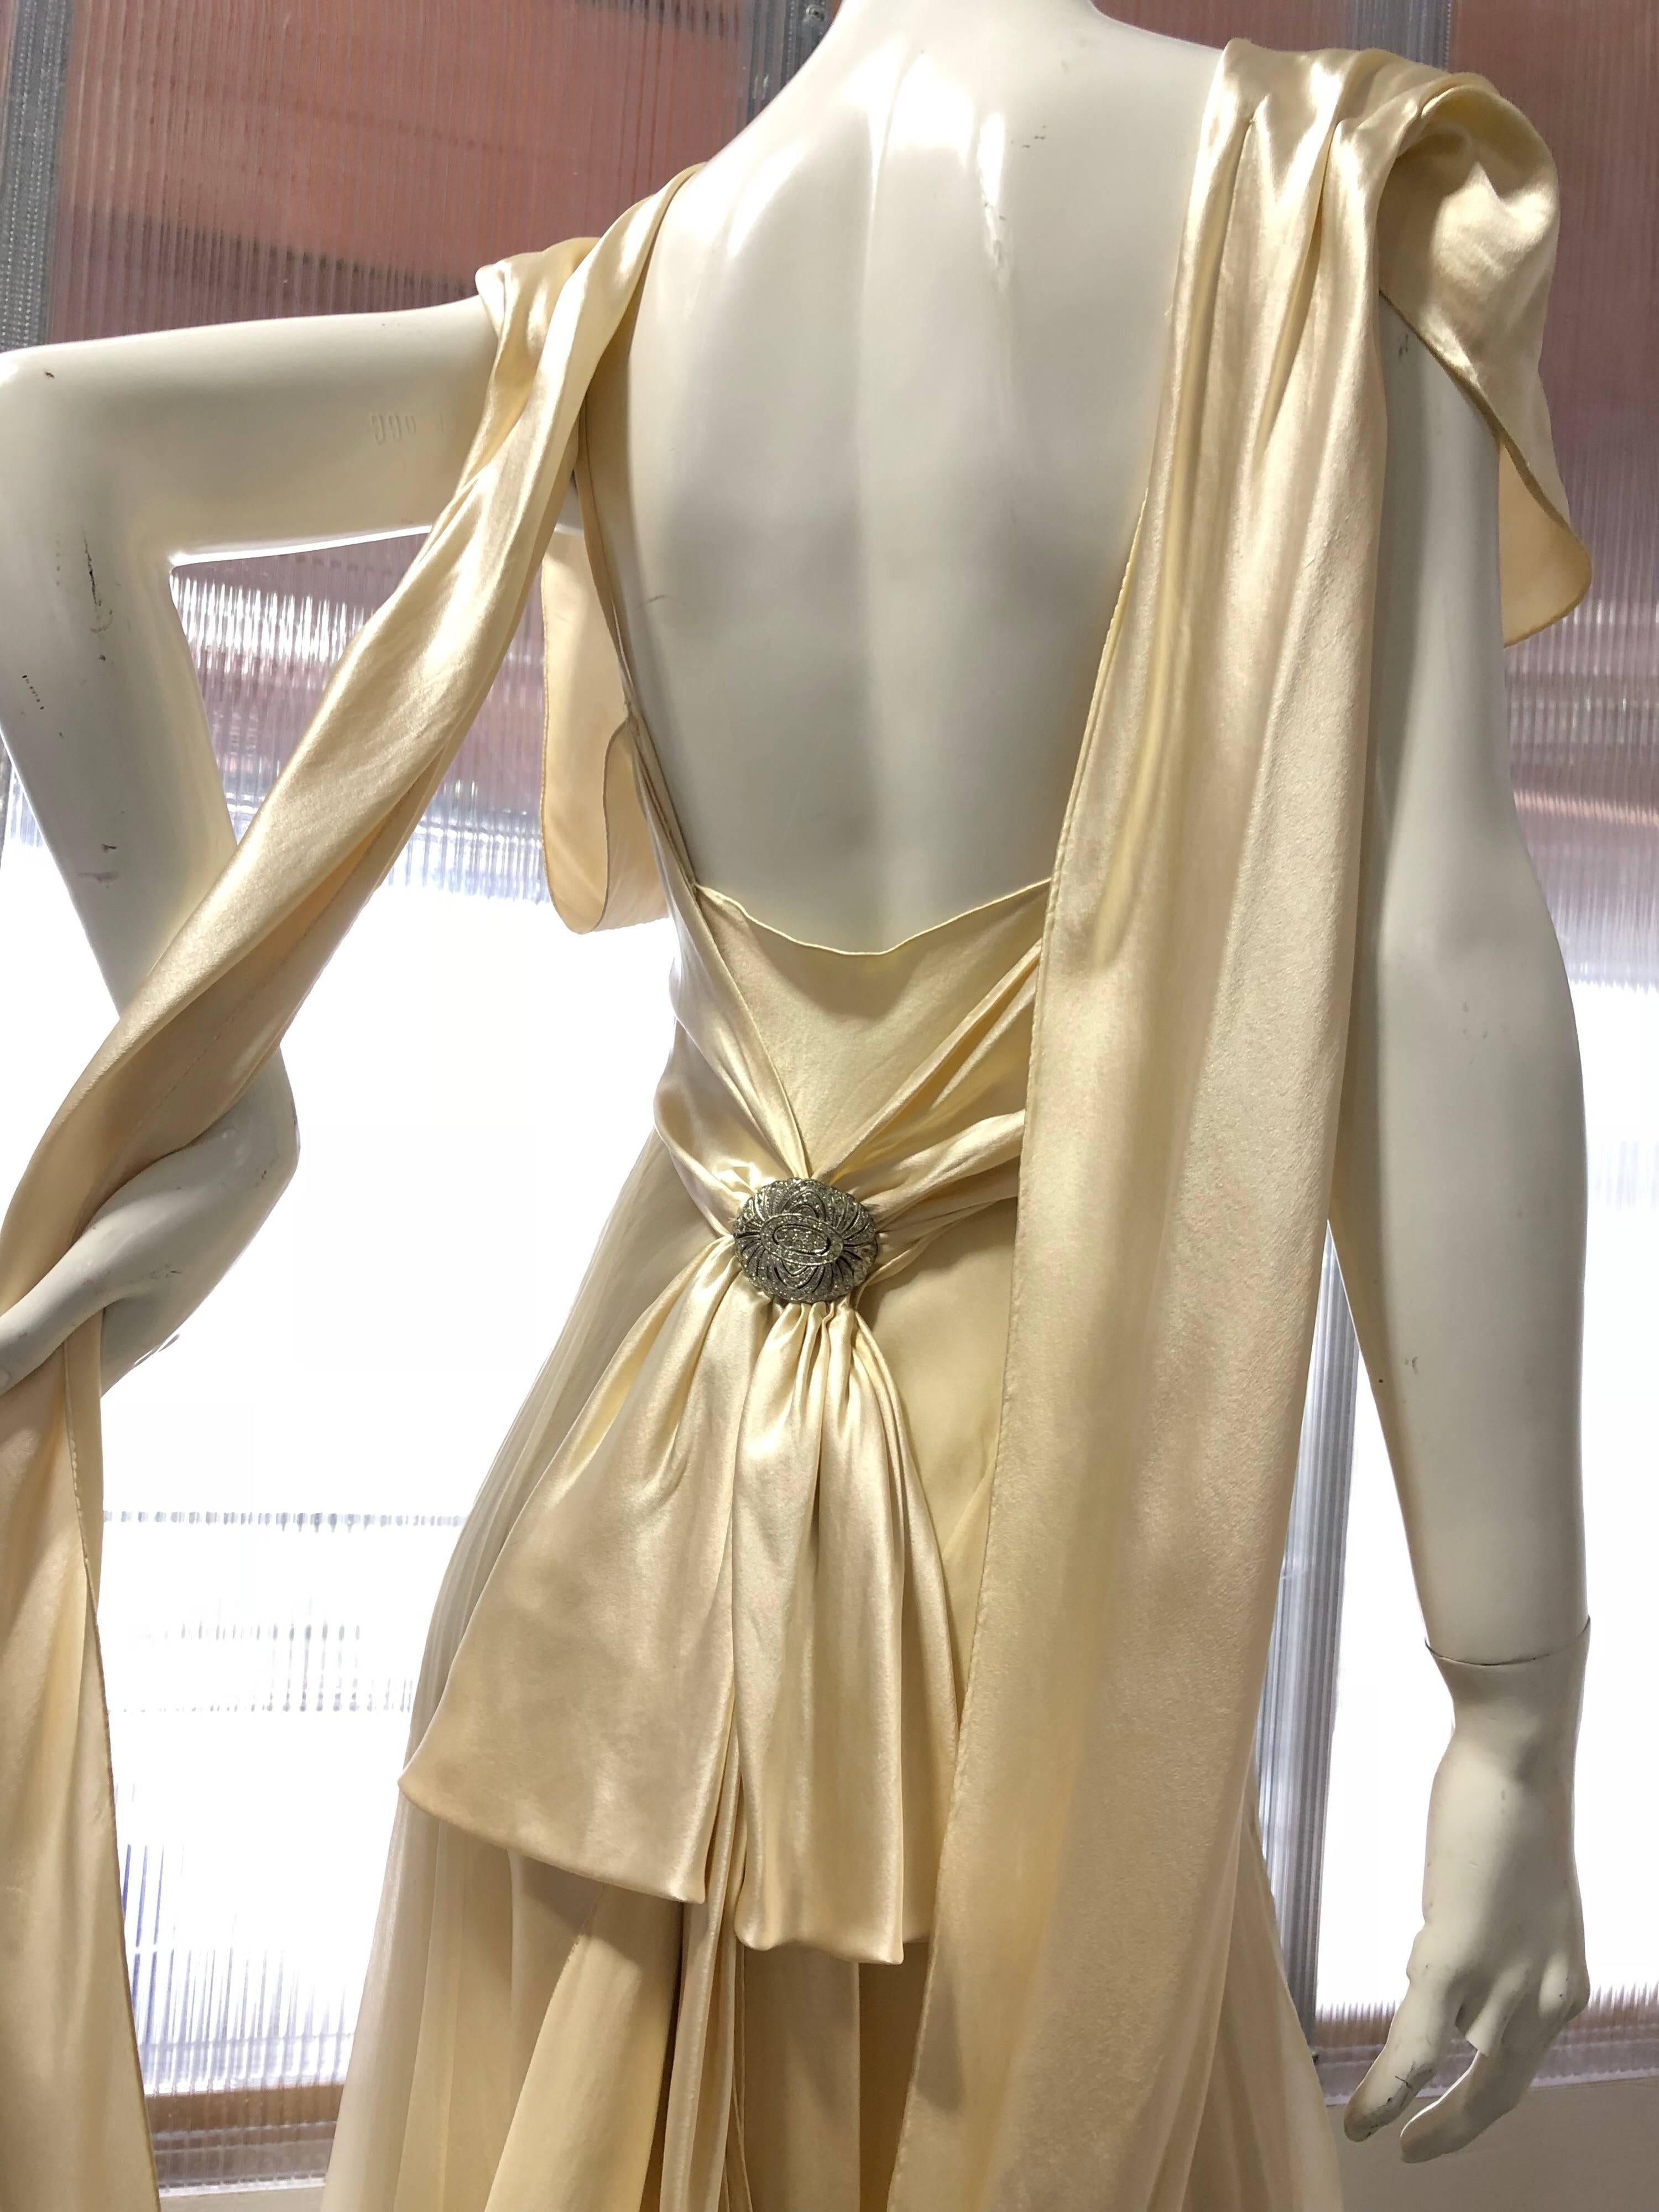 Hattie Carnegie Art Deco Bias Gown in Candlelight Silk Satin and Chiffon, 1930s  1